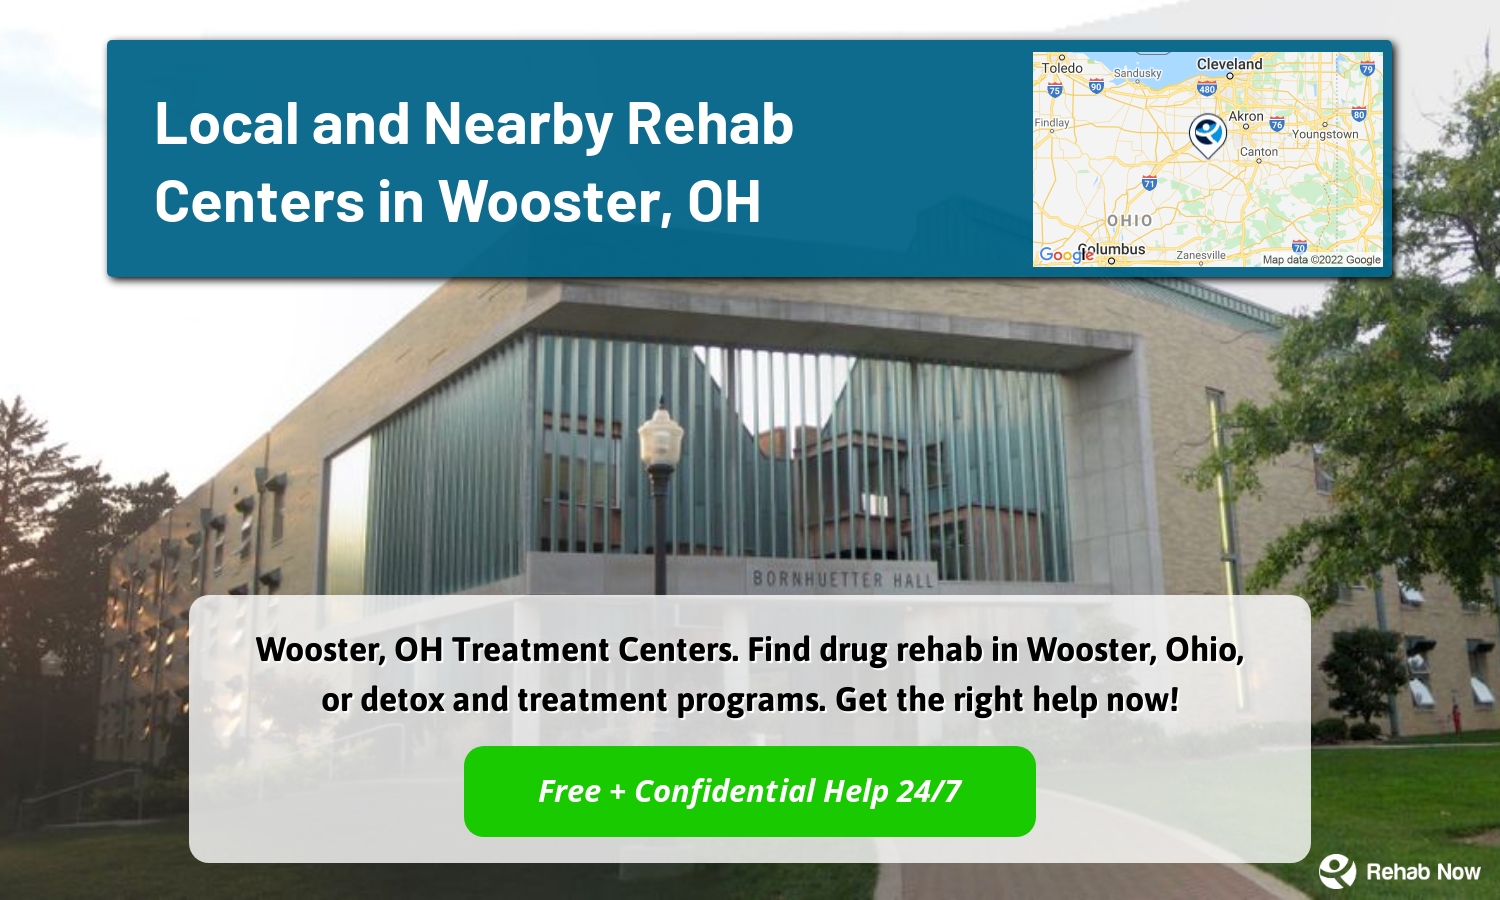 Wooster, OH Treatment Centers. Find drug rehab in Wooster, Ohio, or detox and treatment programs. Get the right help now!